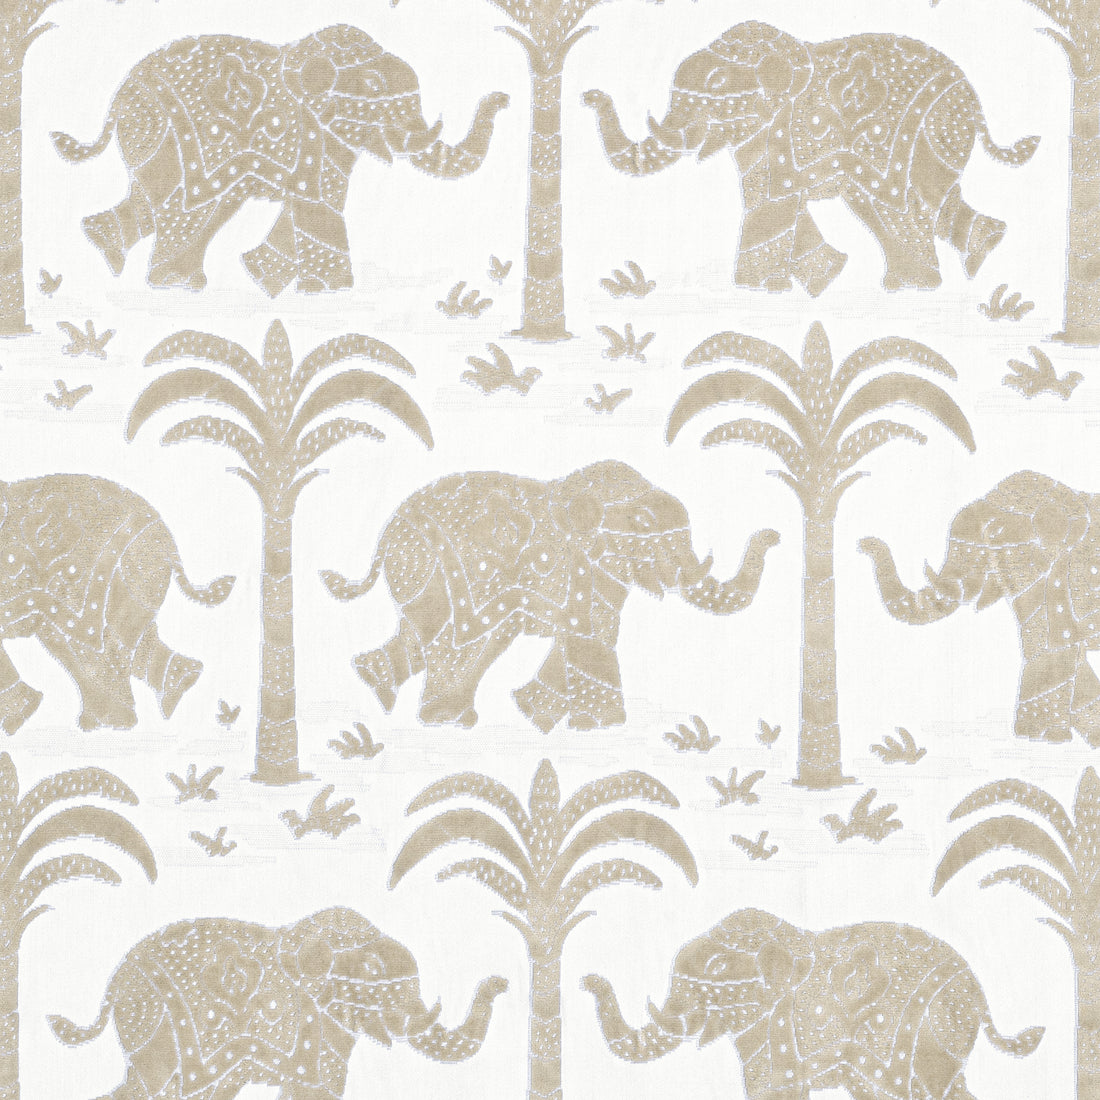 Elephant Velvet fabric in beige color - pattern number W716205 - by Thibaut in the Kismet collection